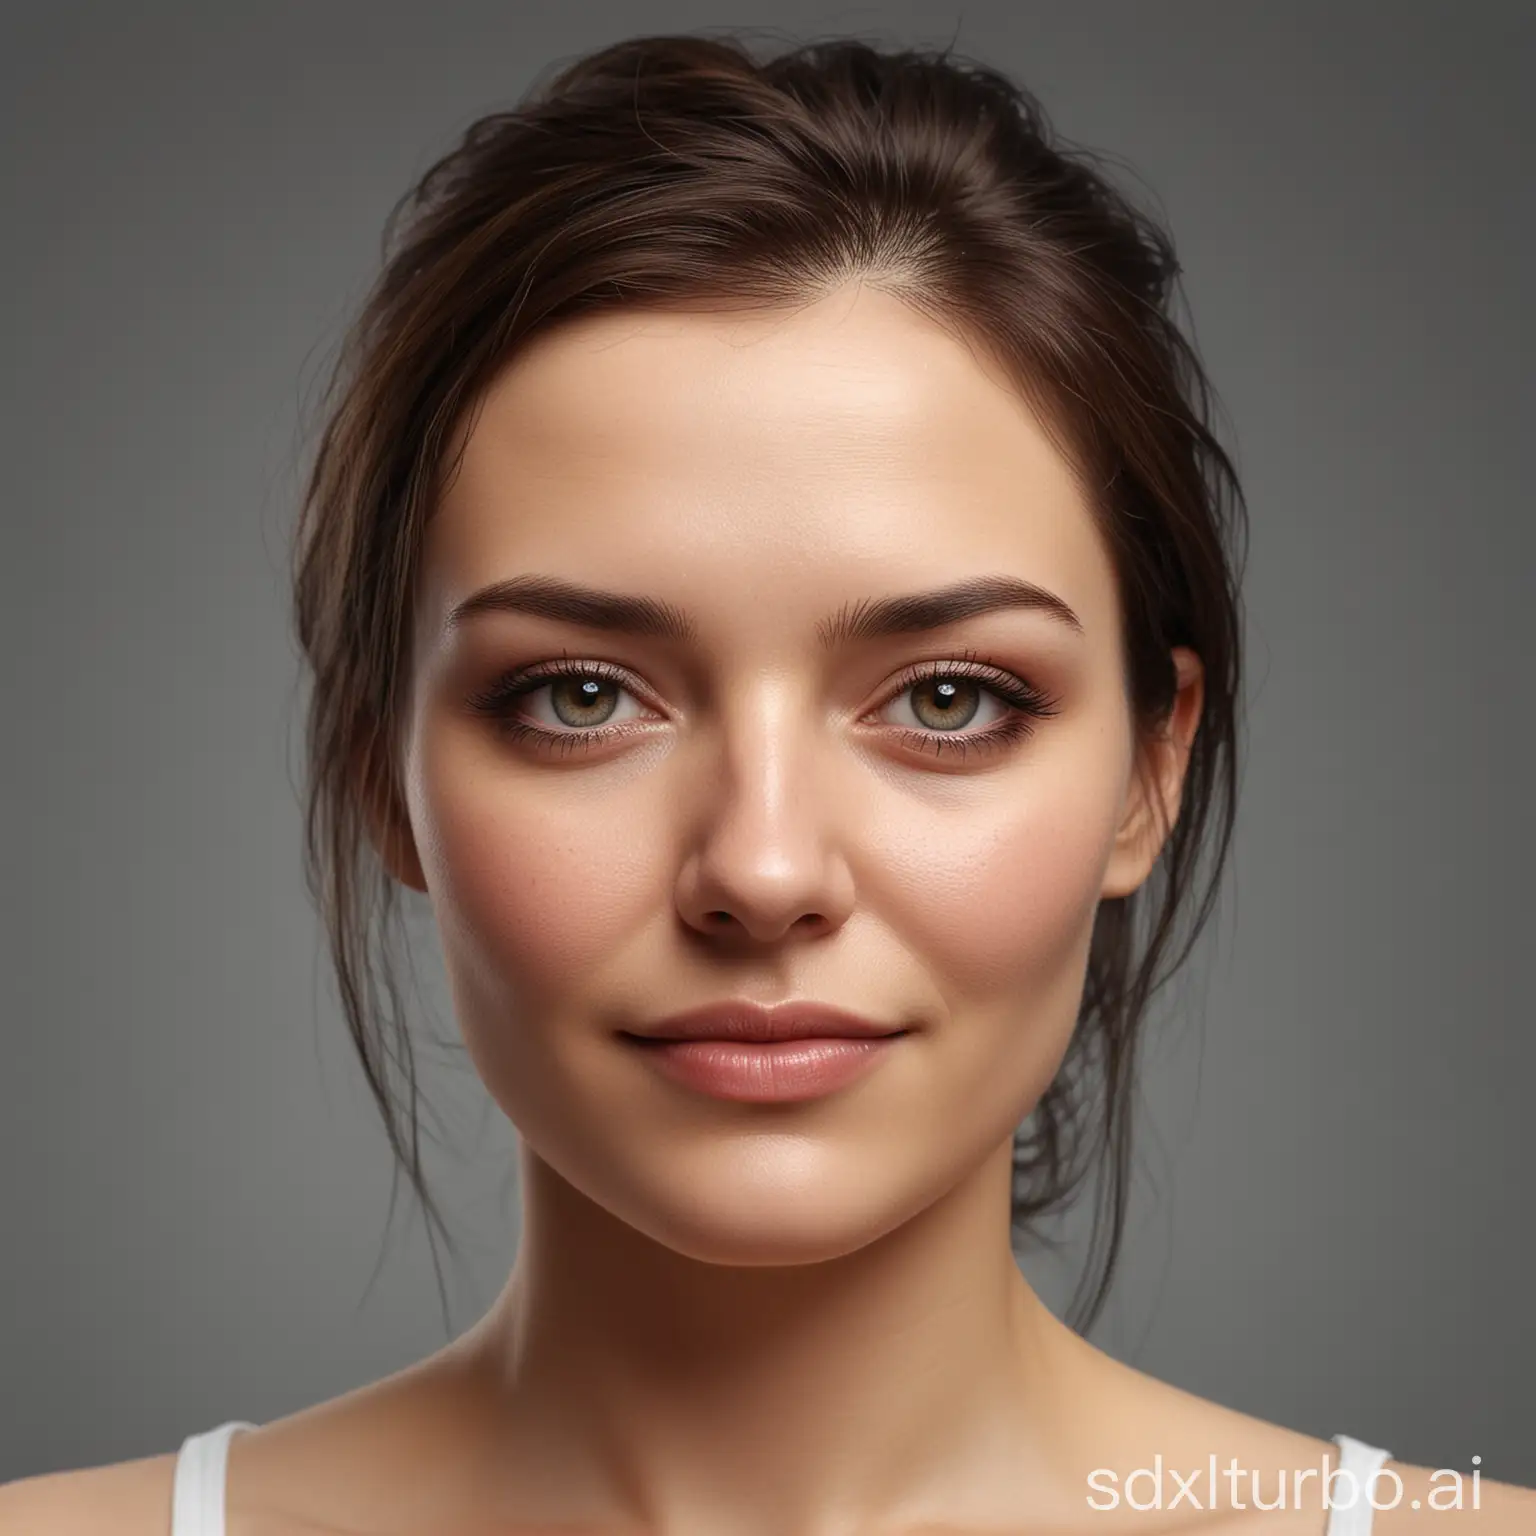 Serious-Stylish-Woman-with-Realistic-Expression